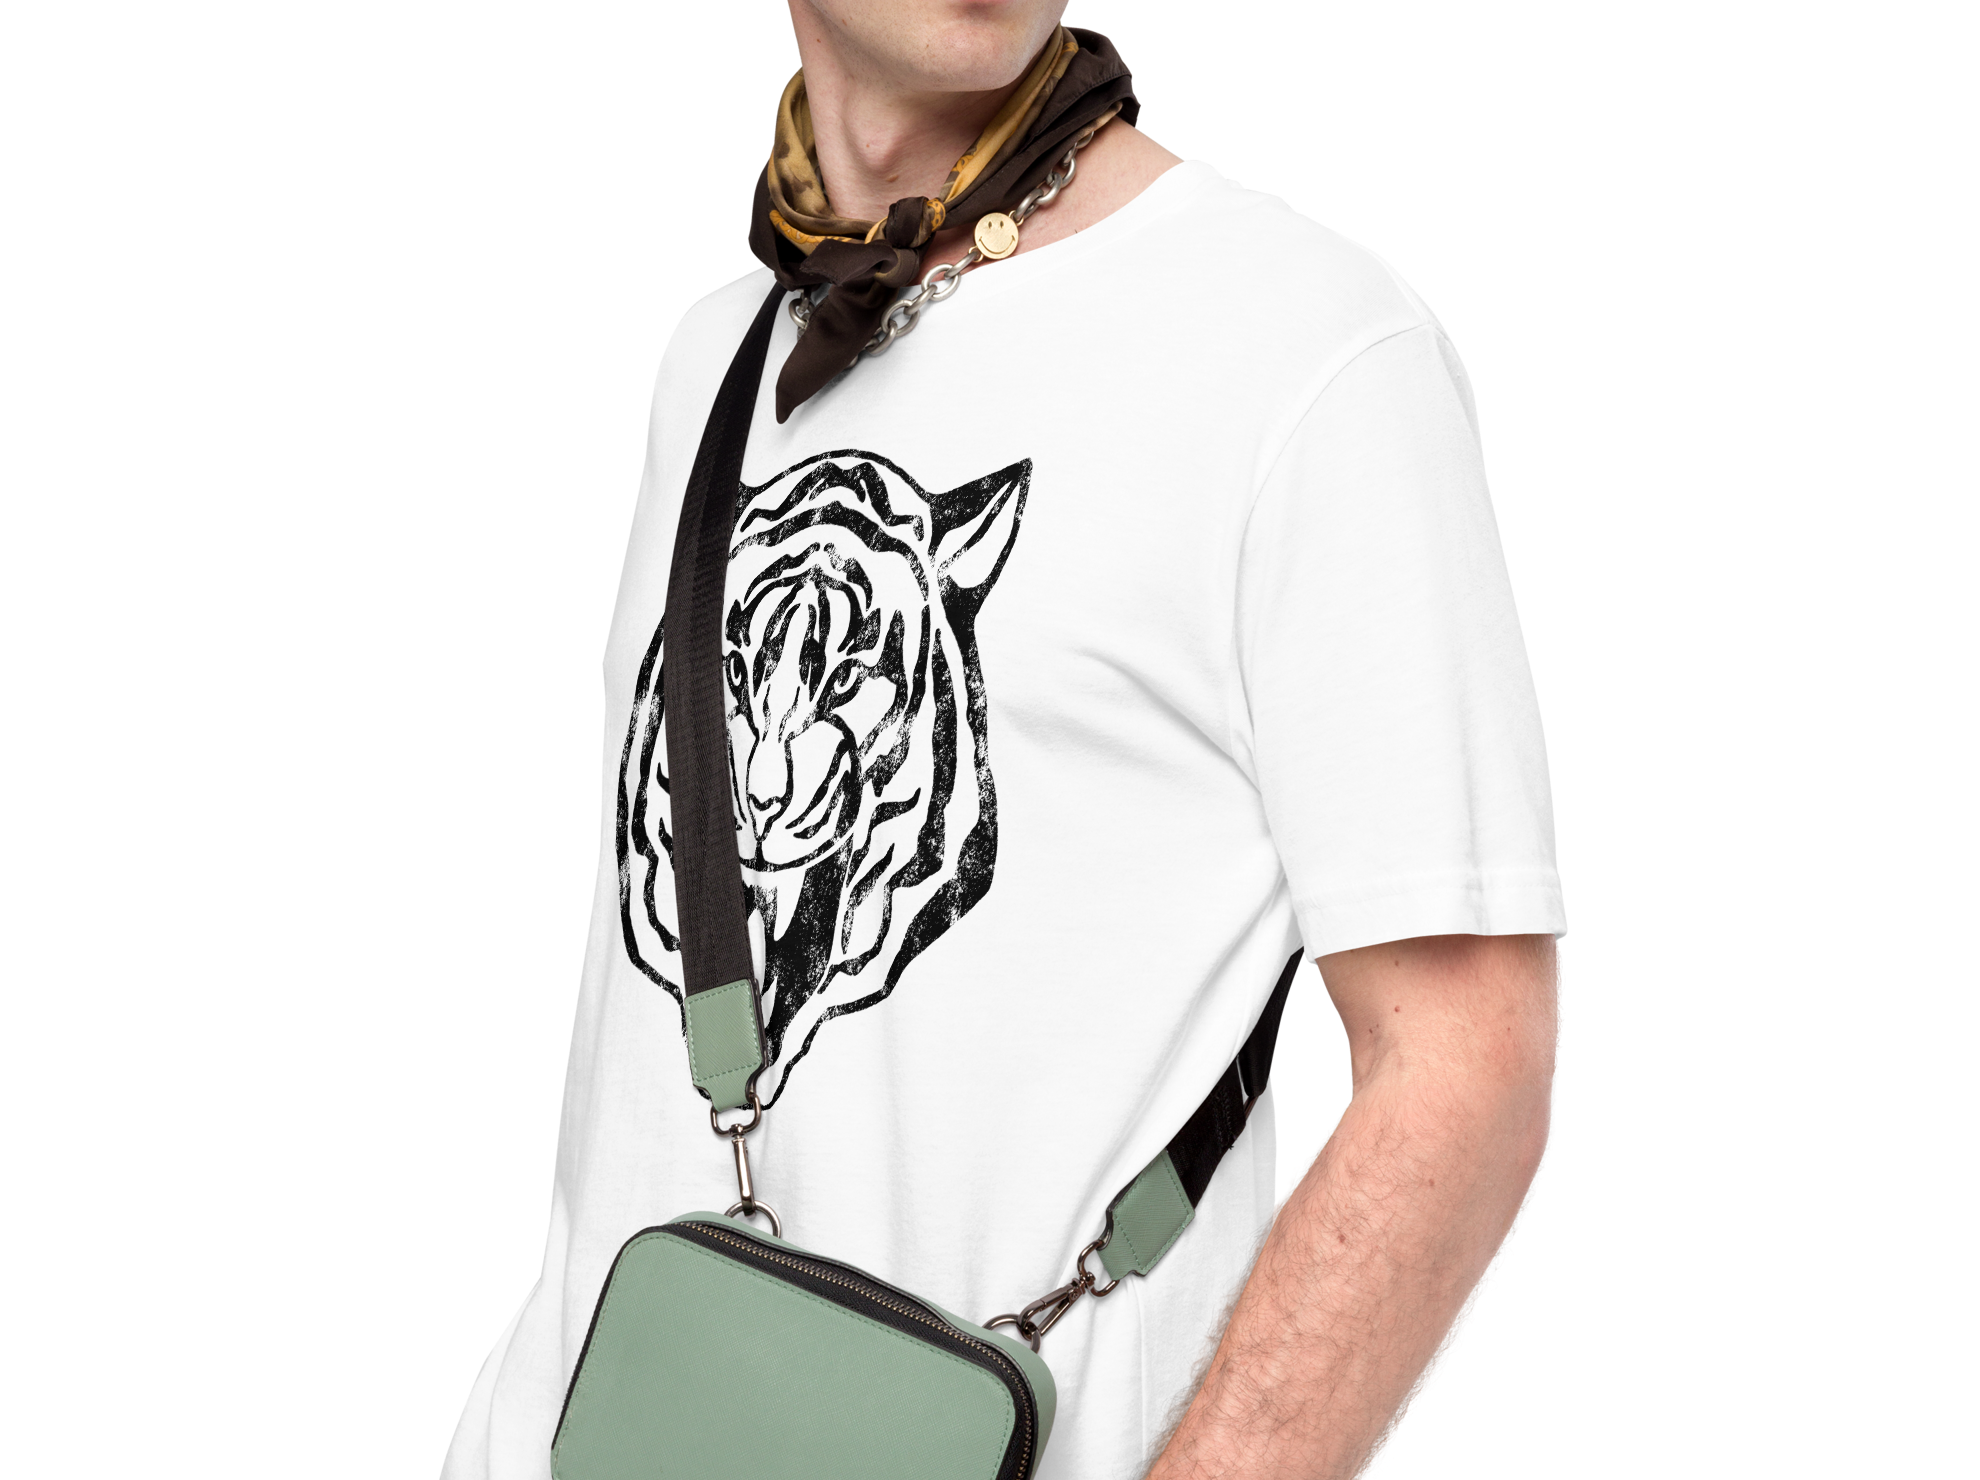 White-Out Bengal Tiger